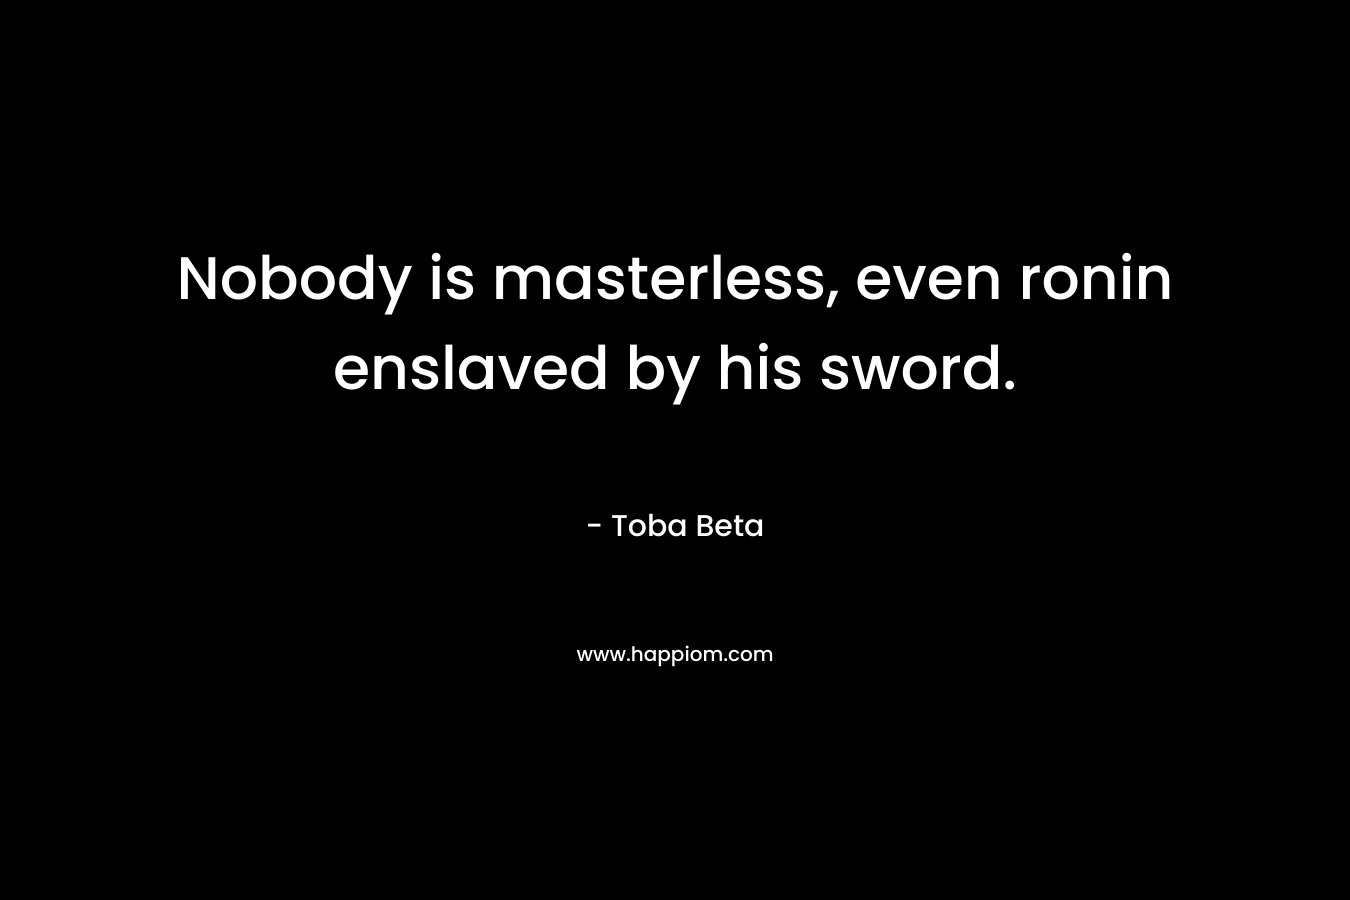 Nobody is masterless, even ronin enslaved by his sword.